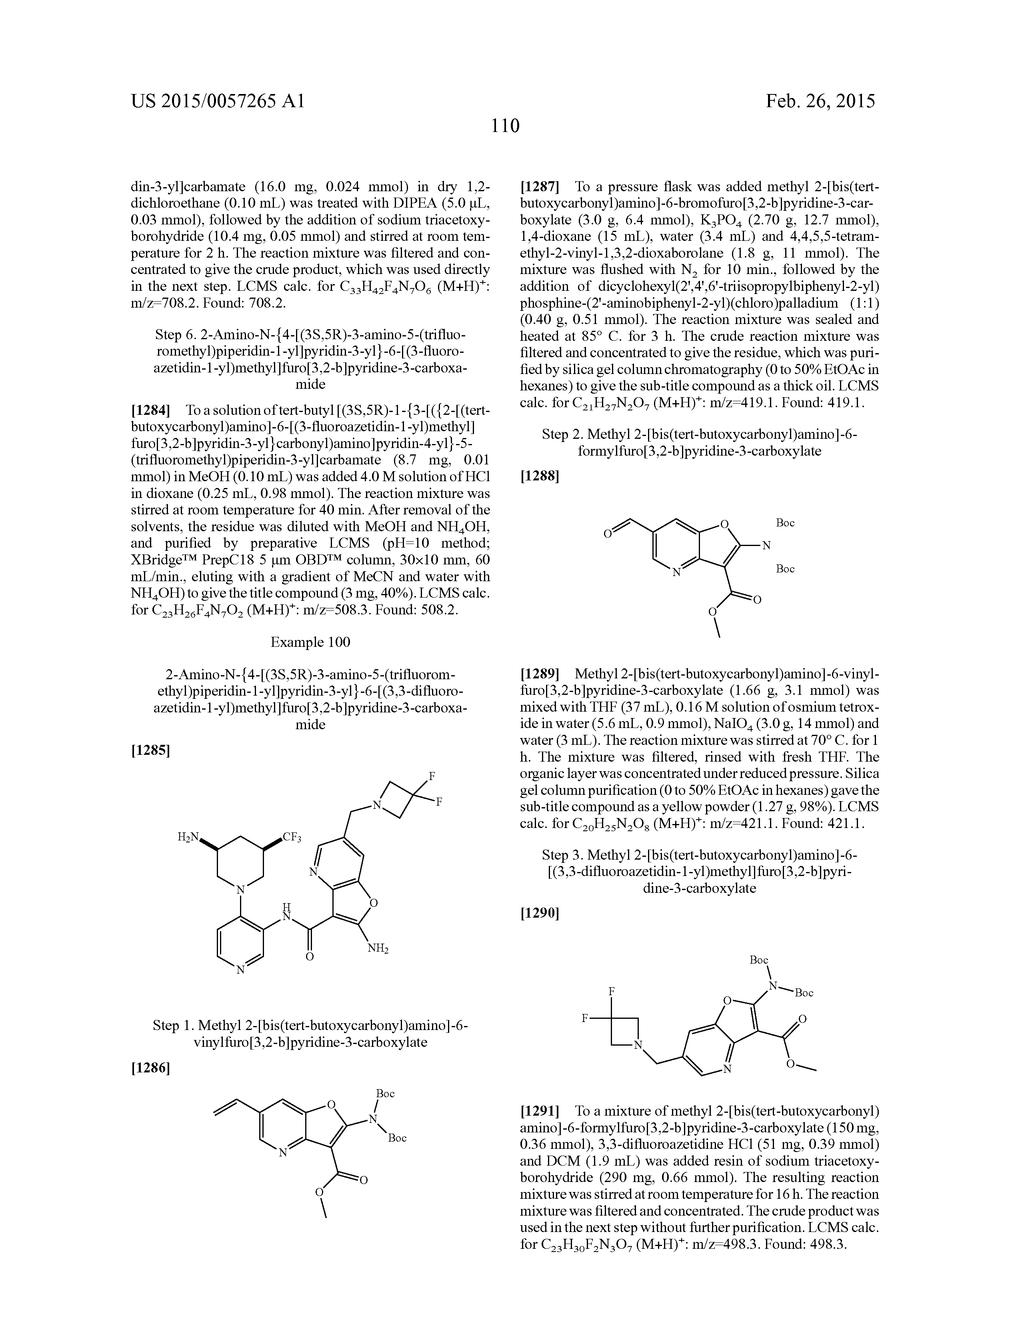 FURO- AND THIENO-PYRIDINE CARBOXAMIDE COMPOUNDS USEFUL AS PIM KINASE     INHIBITORS - diagram, schematic, and image 111